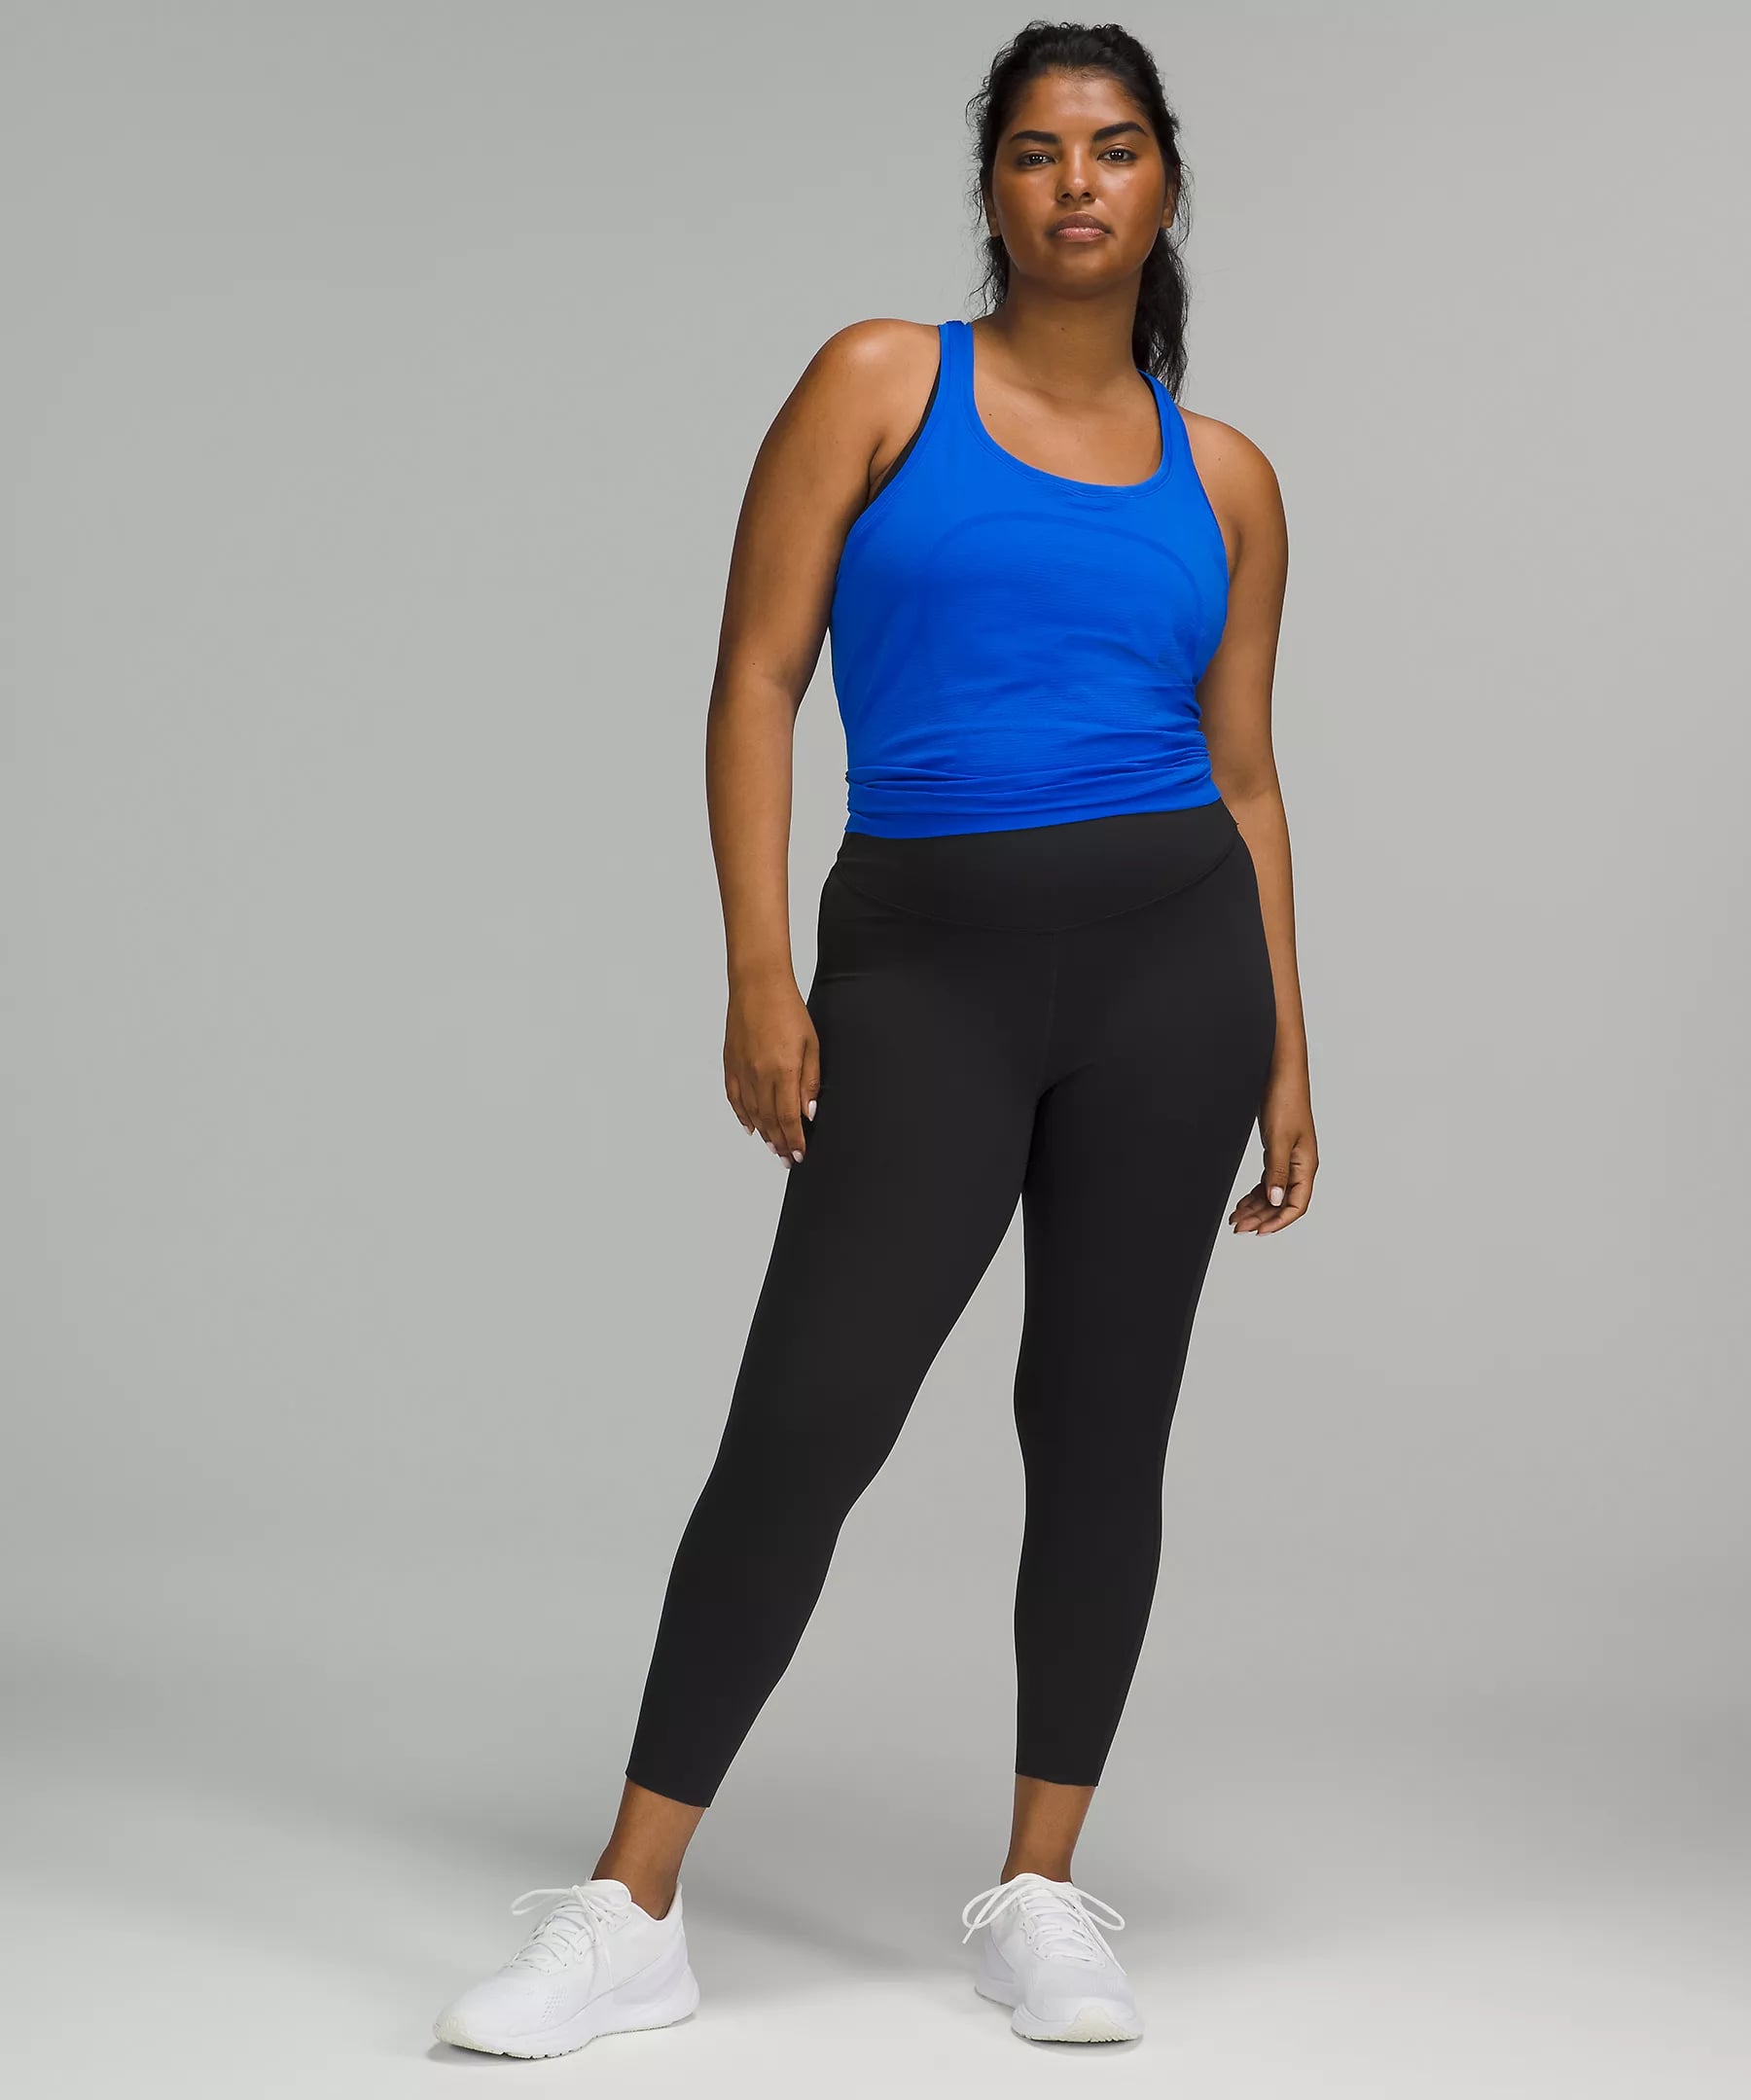 Best Running Leggings That Don't Fall Down: Lululemon Base Pace High-Rise  Tight, If You're a Runner, These Are the 10 Leggings You Need in Your  Arsenal